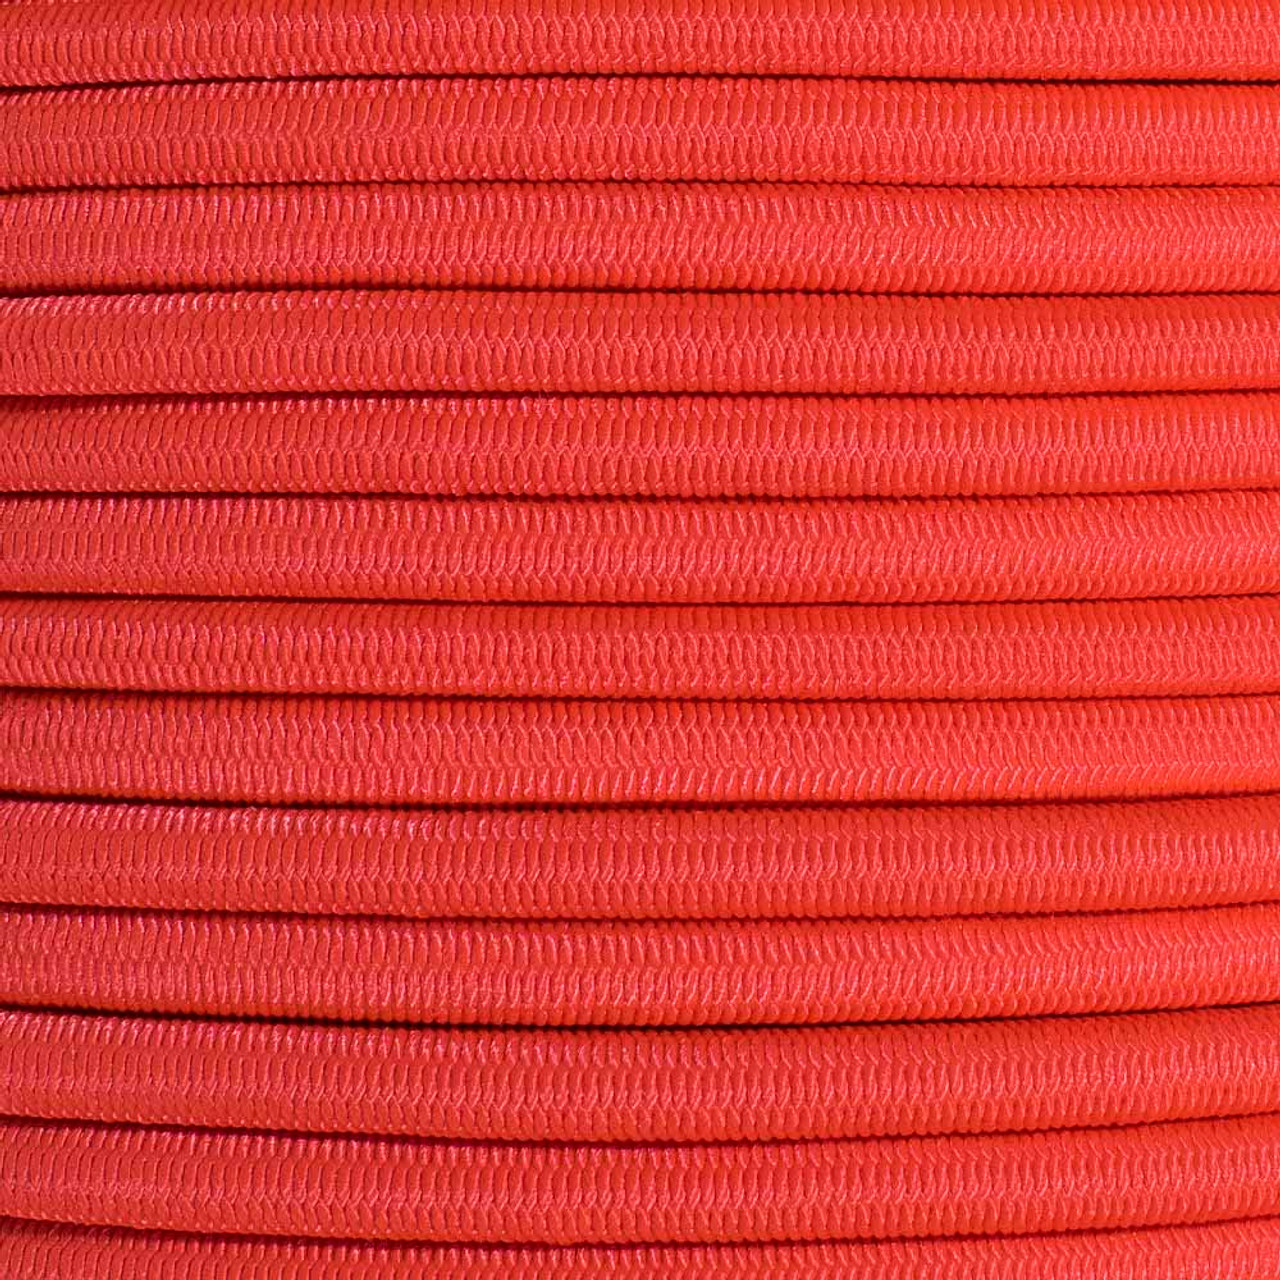 Scarlet Red - 1/4 inch Shock Cord